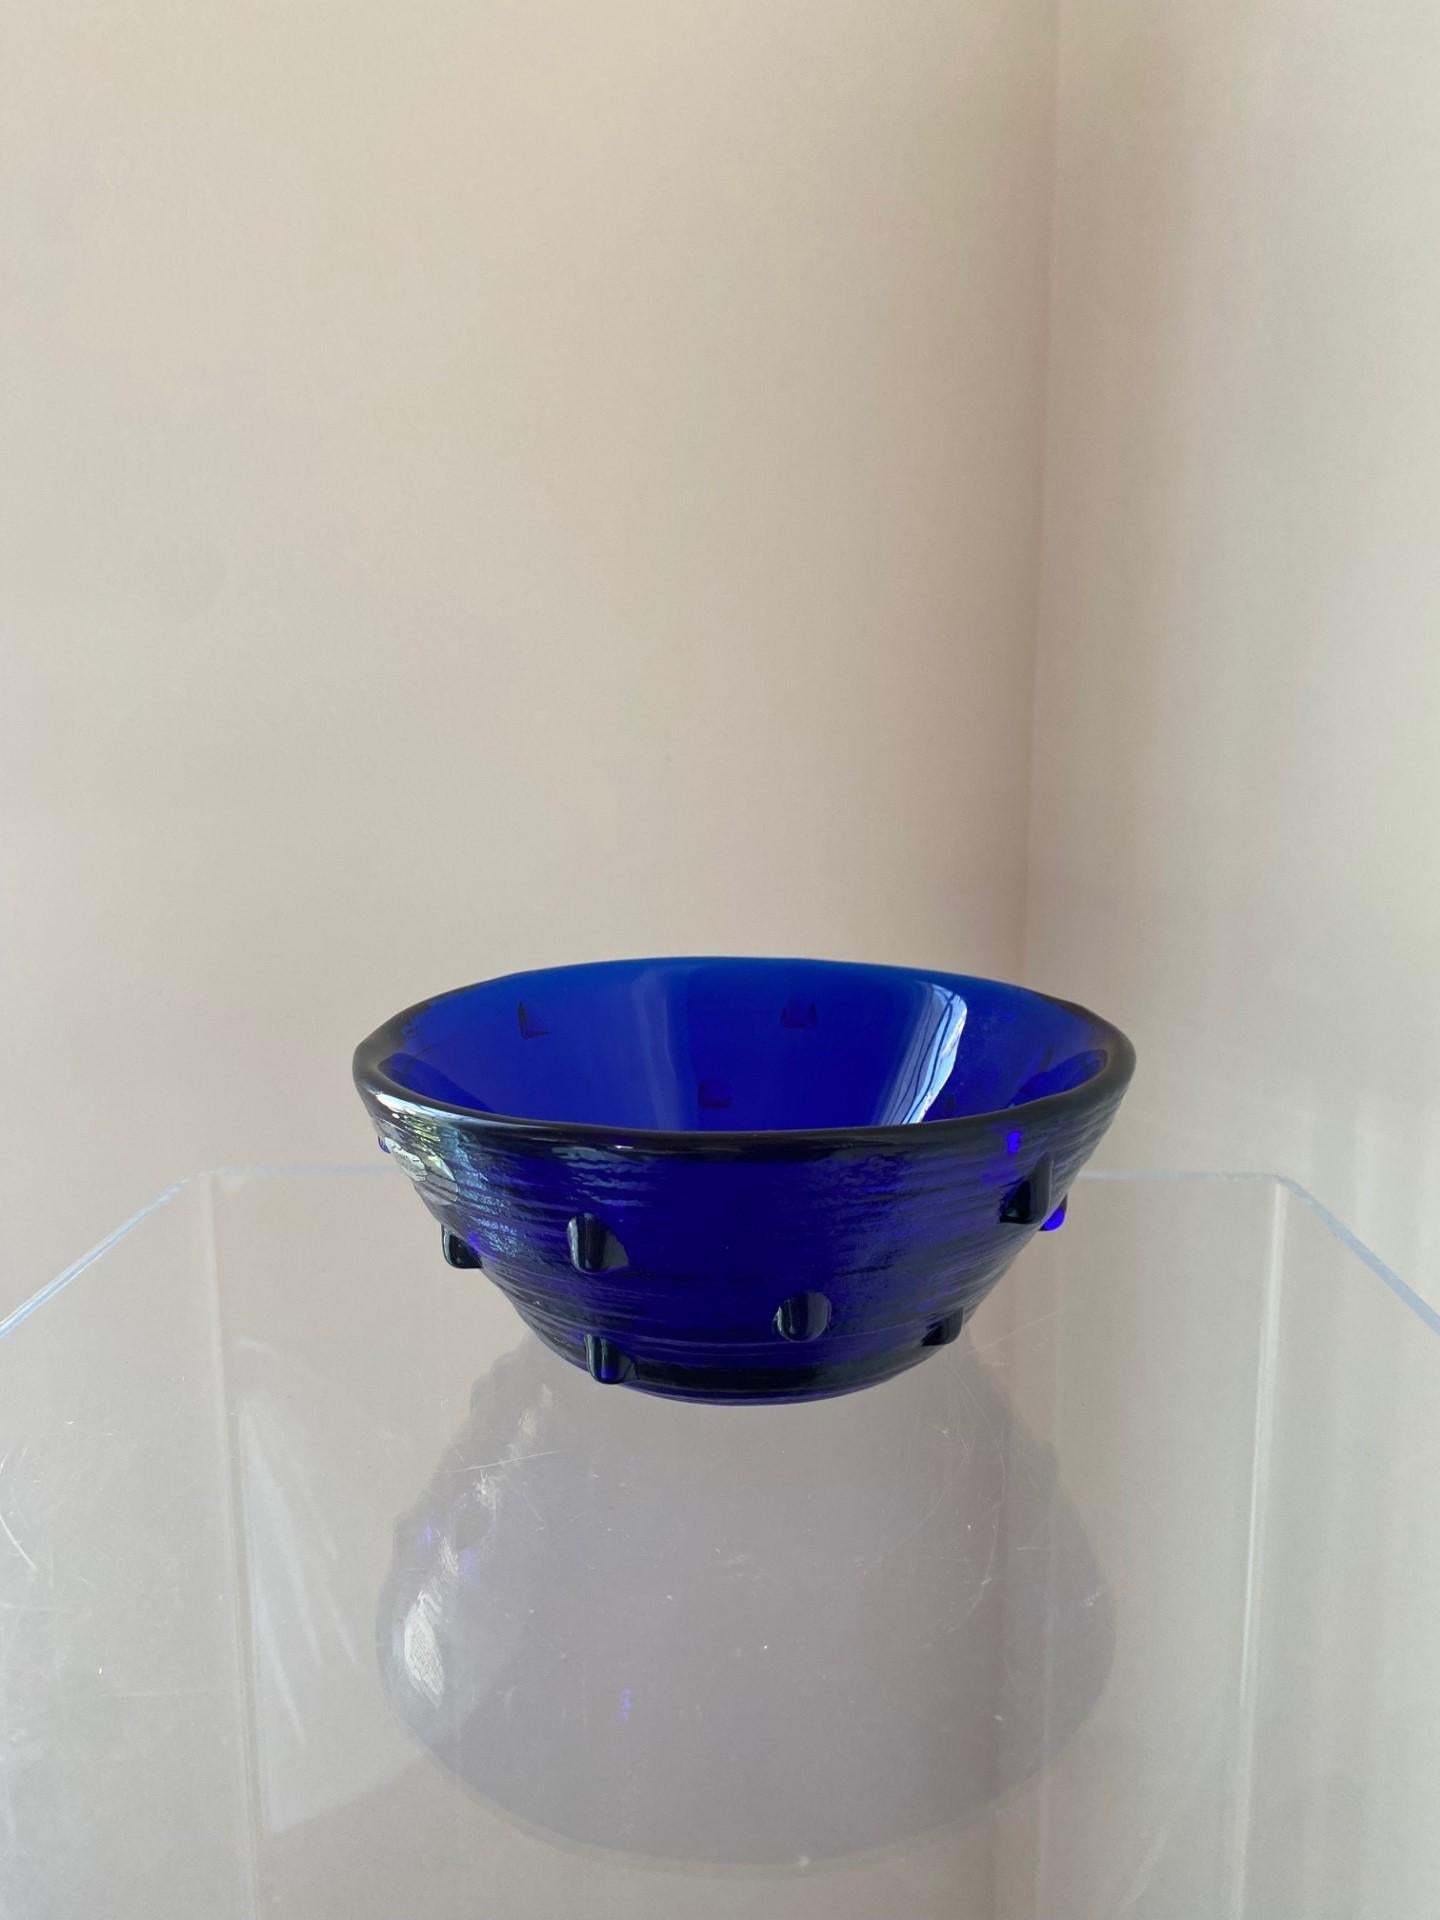 Beautiful handcrafted blown glass bowl by Benklo.  This beautiful piece is signed and conceptualizes the beauty and glow of cobalt blue handblown glass and texture.  The piece's simple profile is elevated with a studded motif making it eclectic and